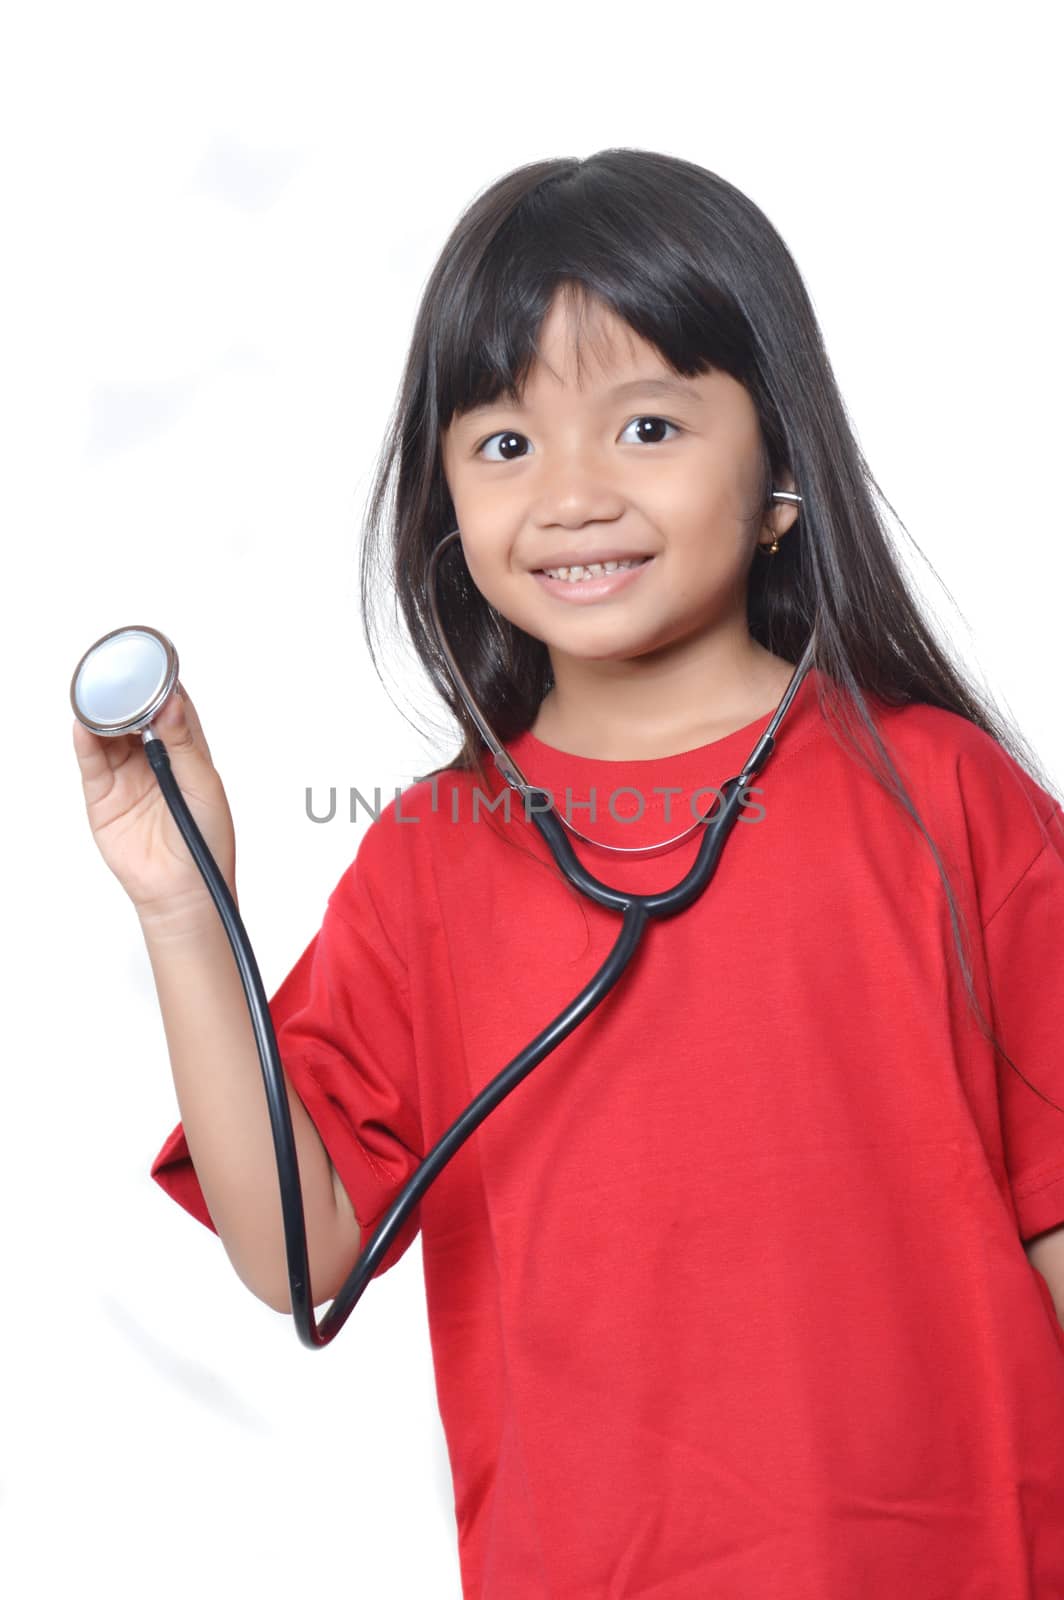 little girl with a stethoscope by antonihalim